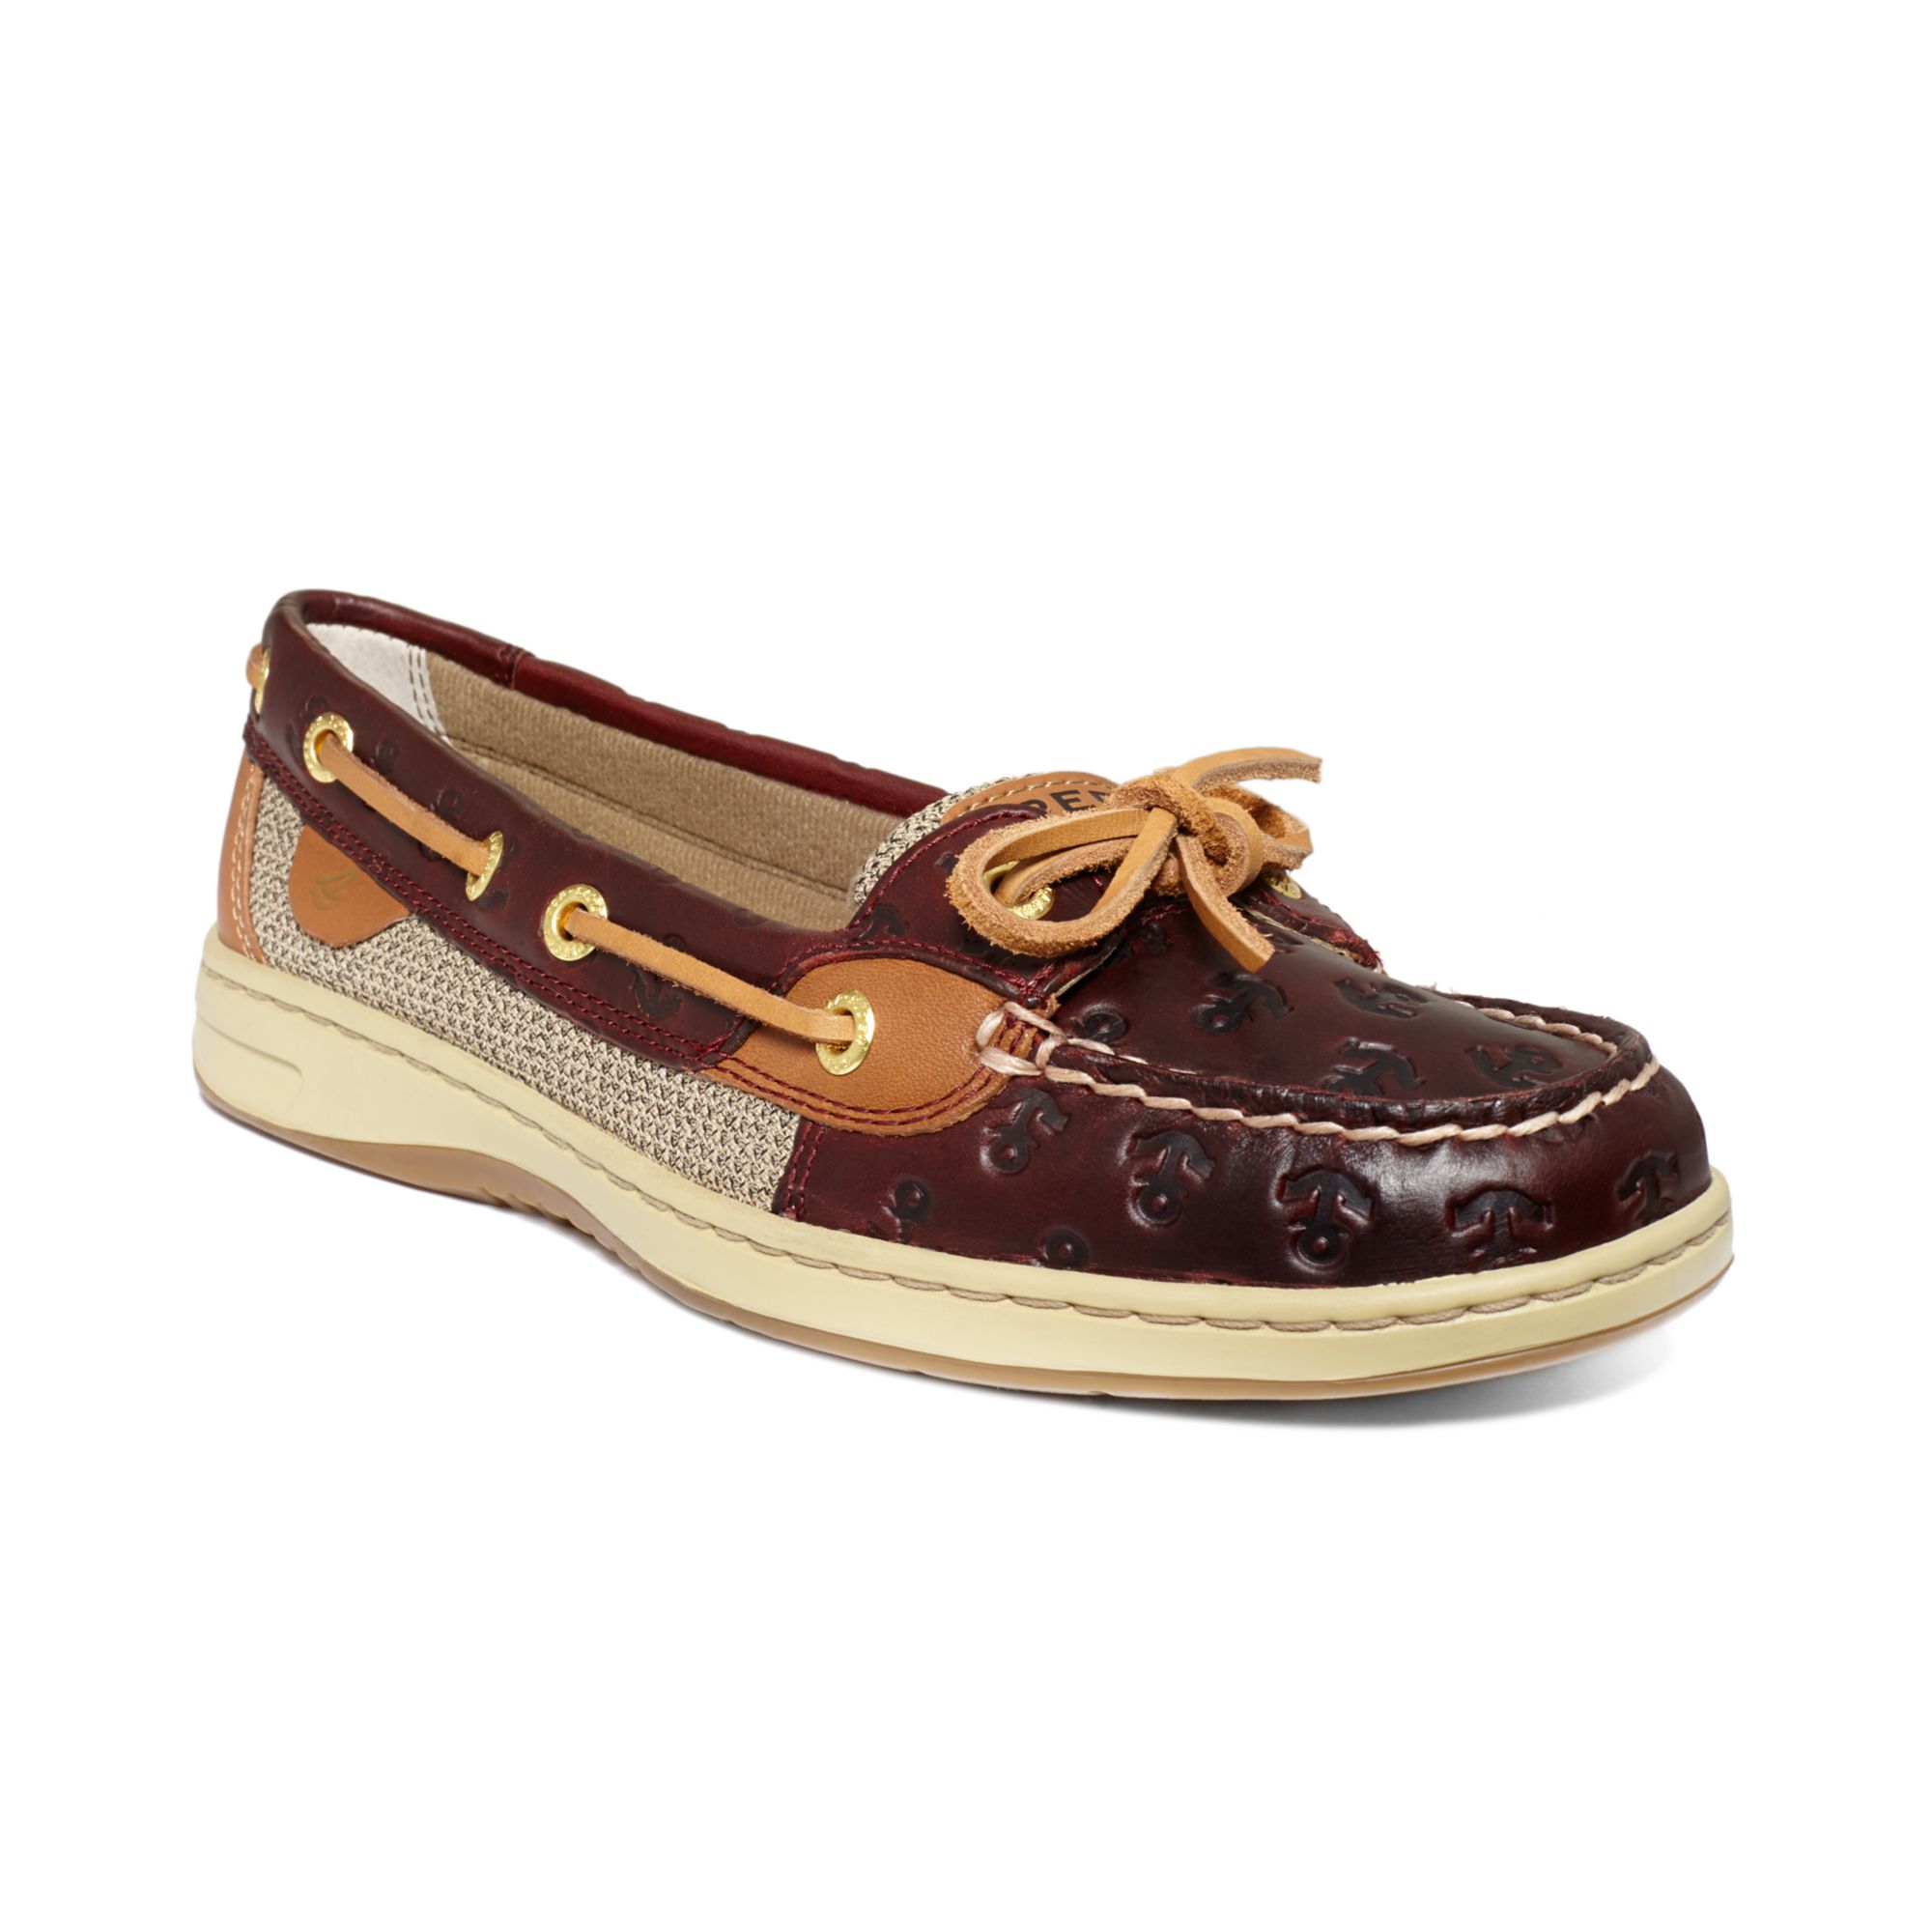 Lyst - Sperry Top-Sider Angelfish Boat Shoes in Brown